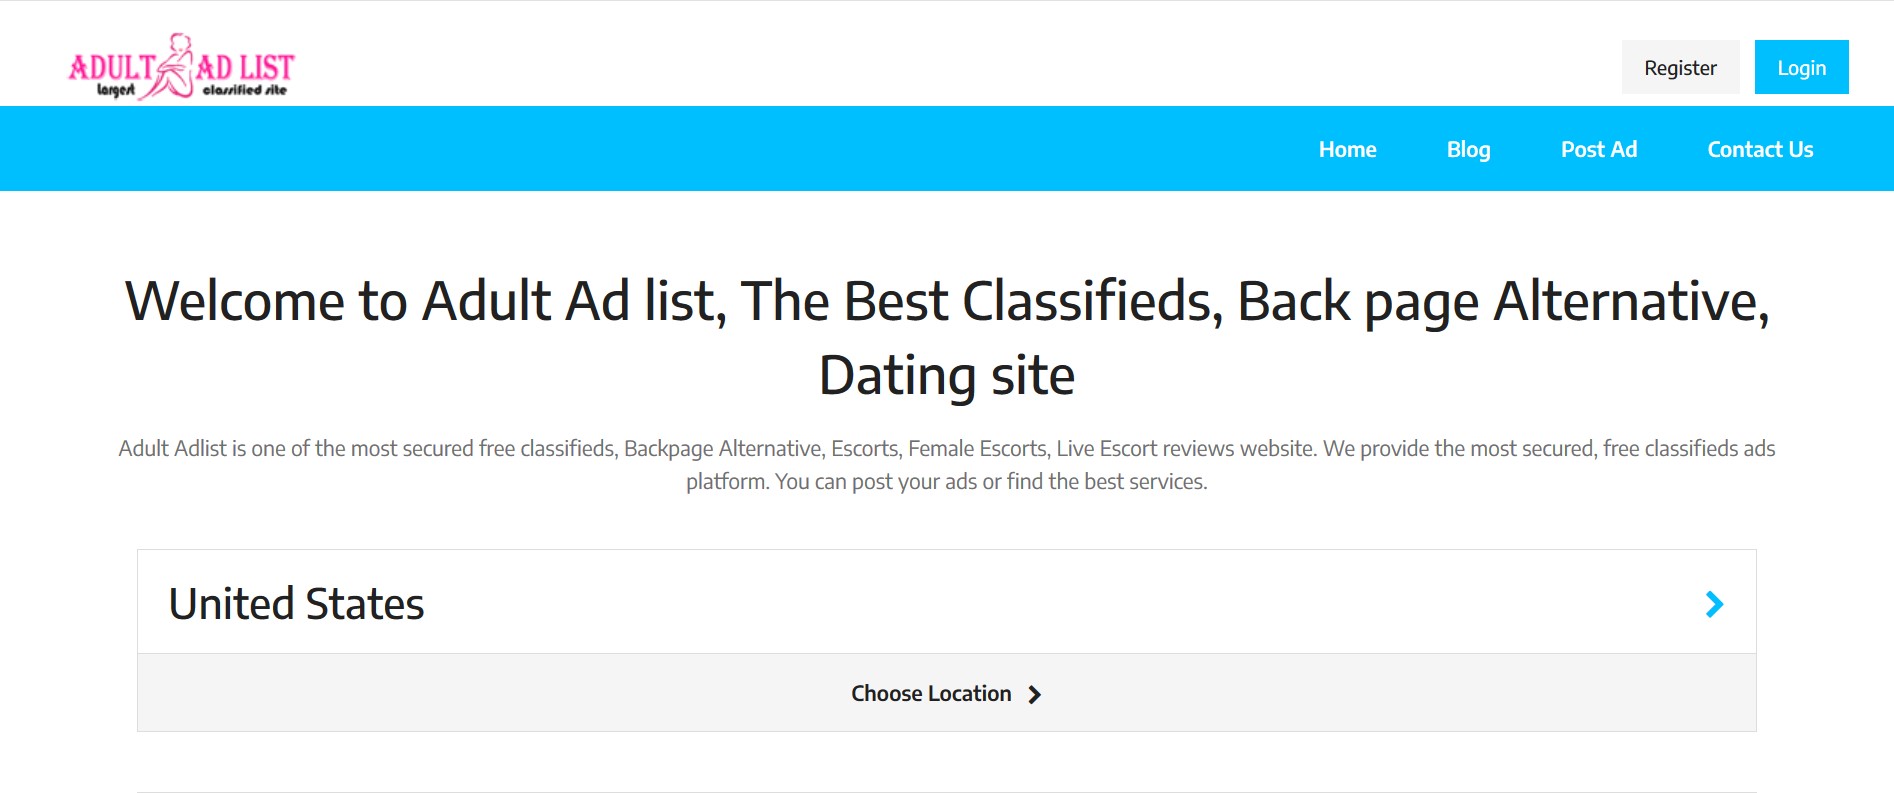 Free Personal Classified Ads Website Name is Adult Adlist